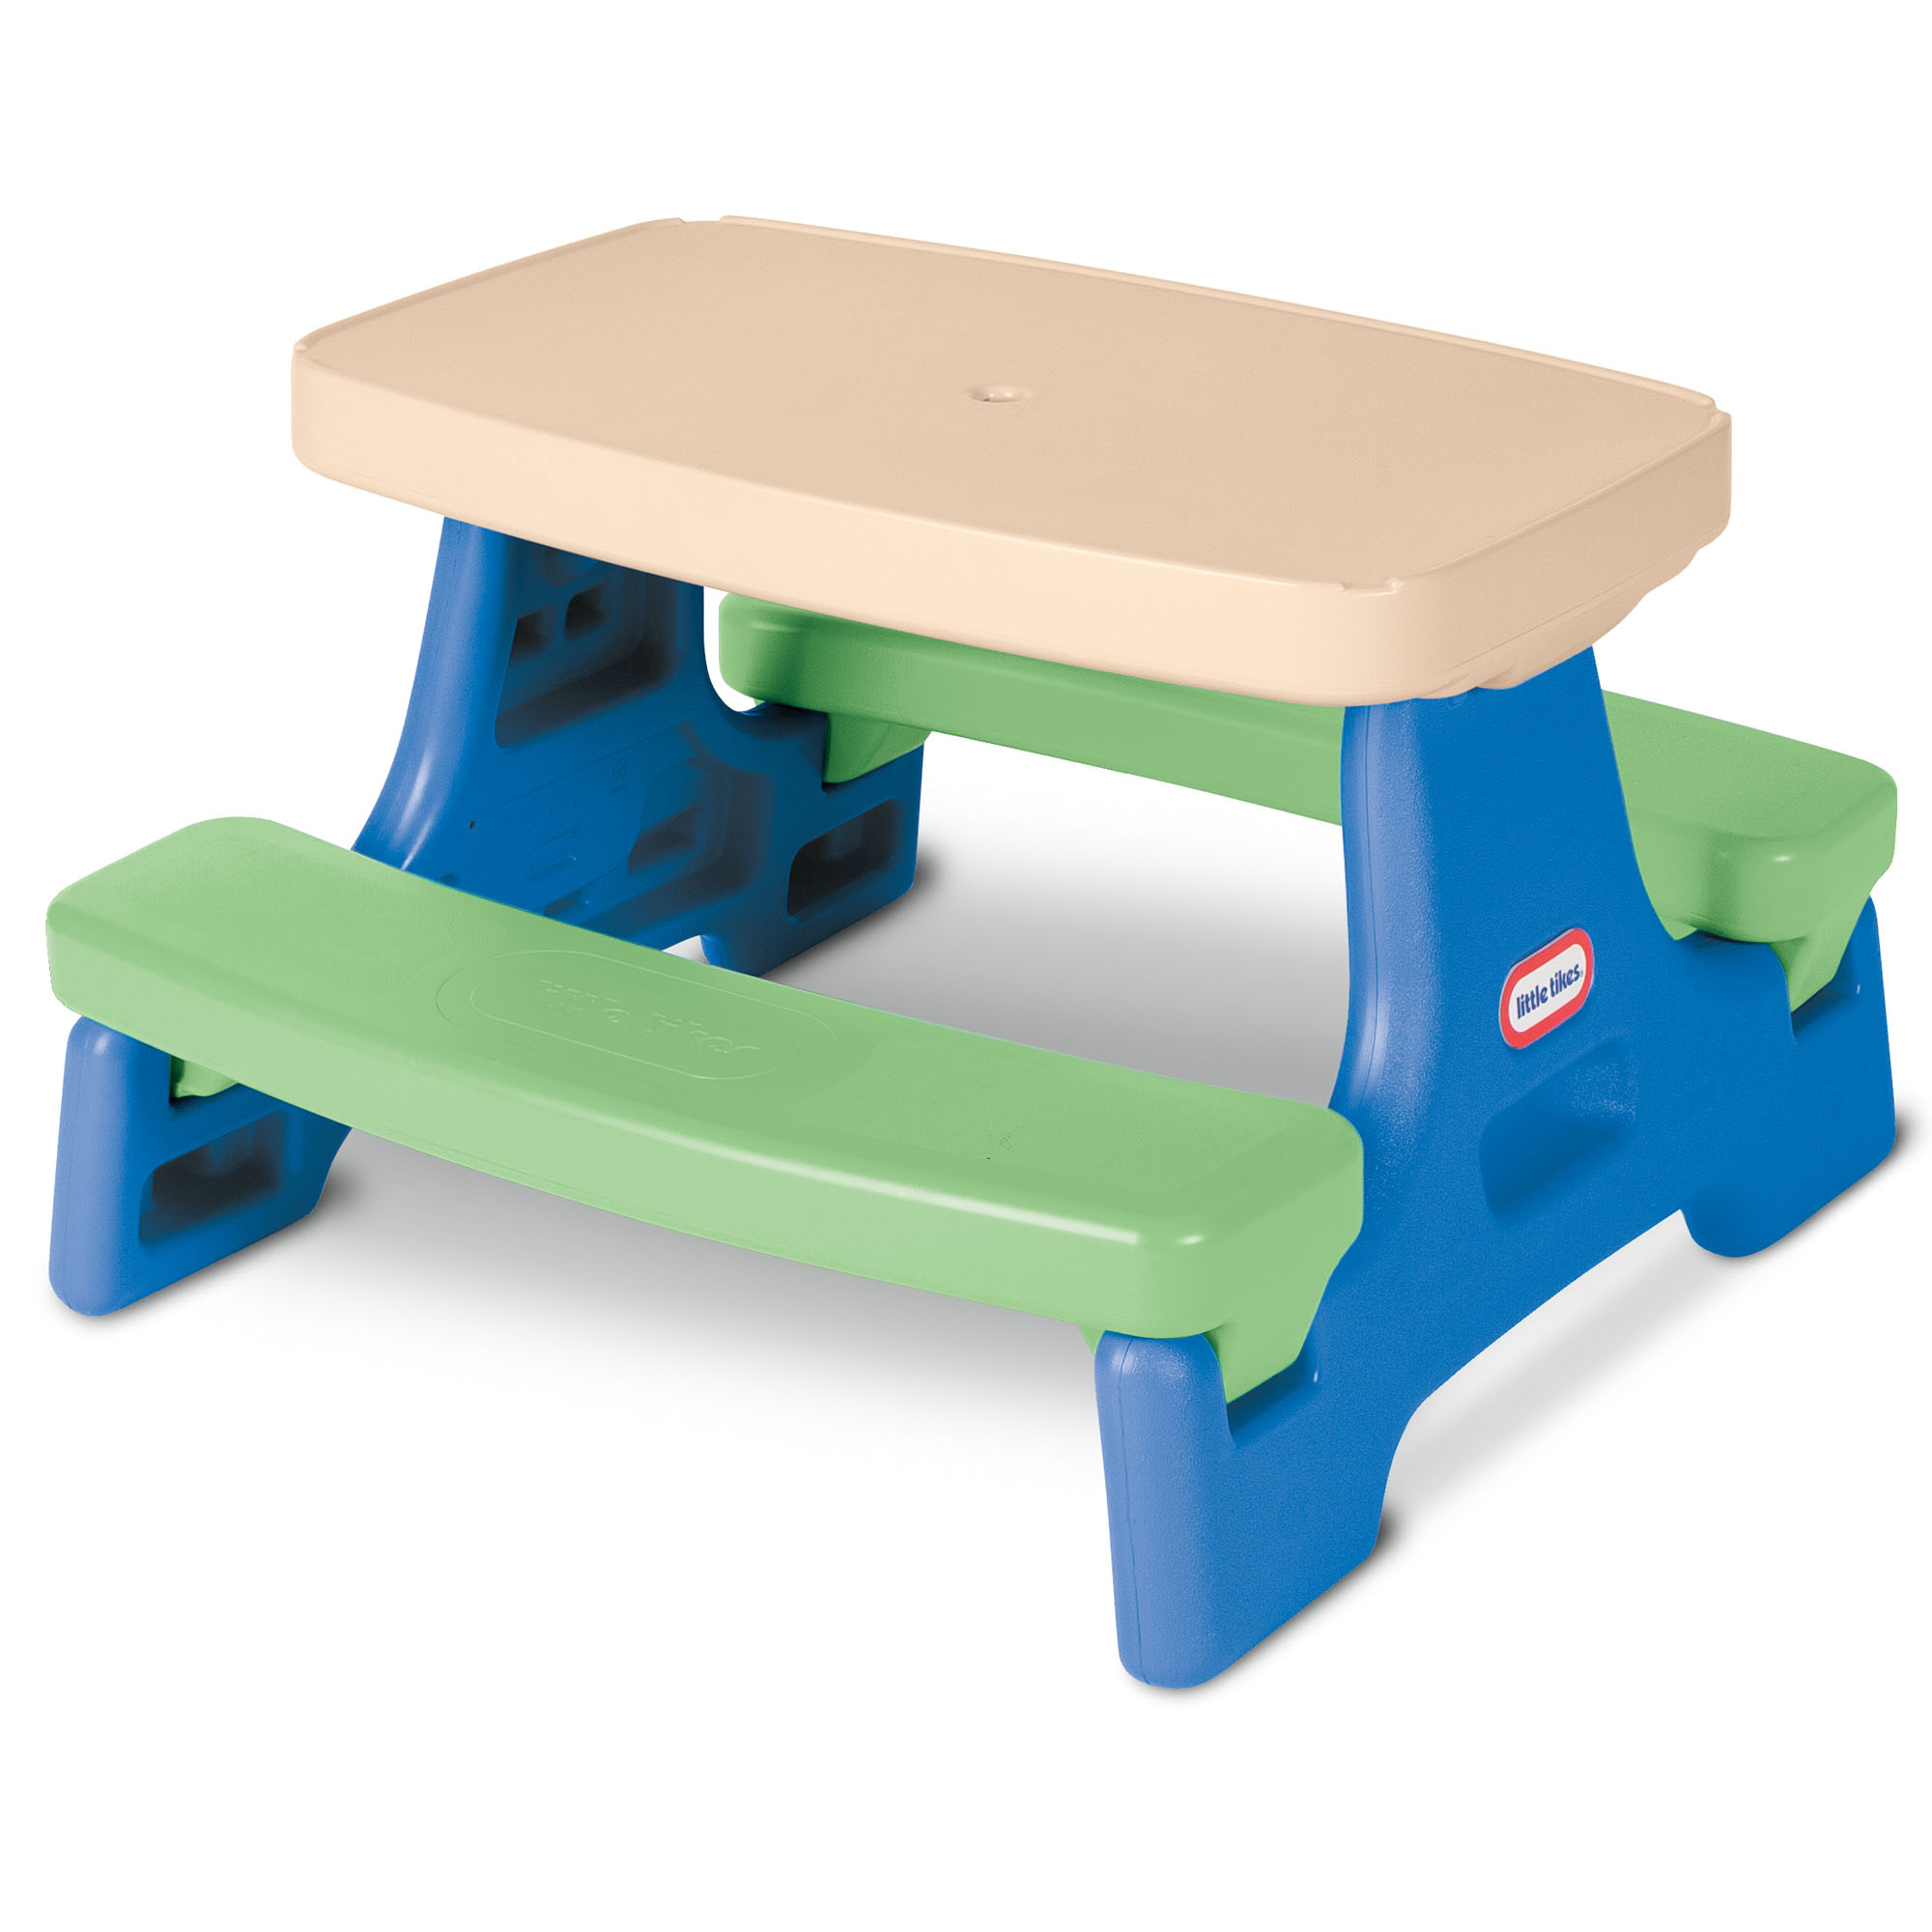 Little Tikes Easy Store Jr. Picnic Table with Umbrella, Blue & Green - Play Table with Umbrella, for Kids - image 5 of 7